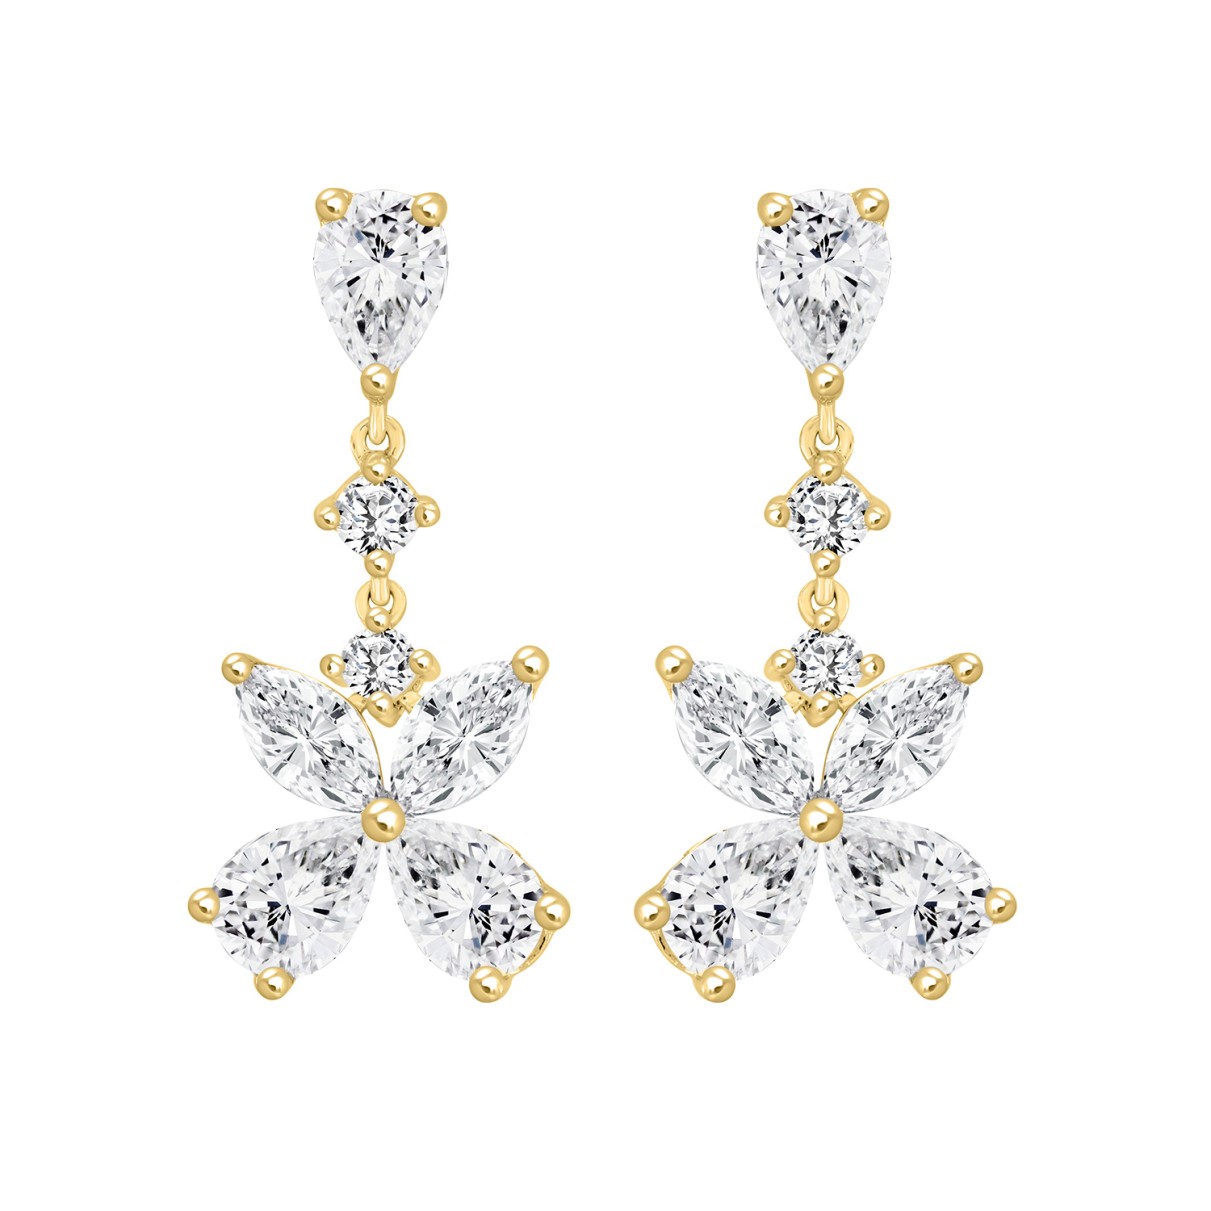 LADIES EARRINGS 3CT ROUND/MARQUISE/PEAR DIAMOND 14K YELLOW GOLD